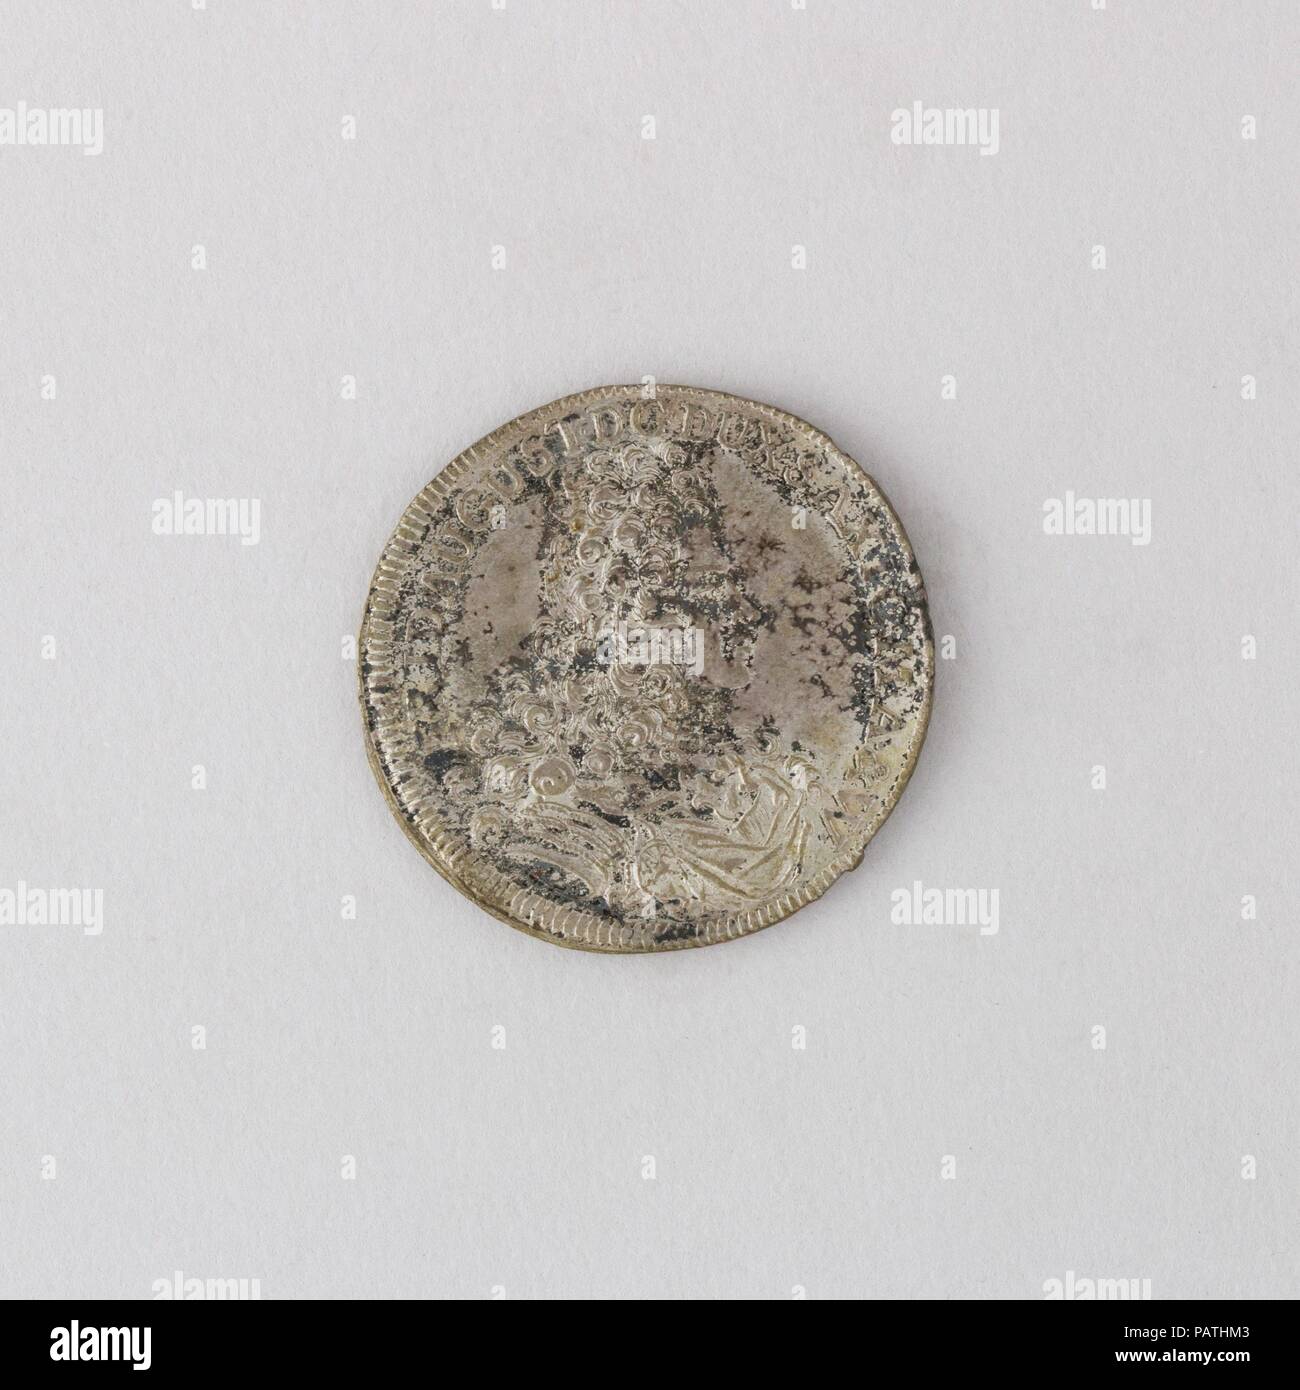 Coin (Two-Thirds Thaler) Showing Frederick Augustus I, Duke and Elector of Saxony. Culture: German. Dimensions: Diam. 1 1/2 in. (3.8 cm); thickness 1/16 in. (0.2 cm); Wt. 0.6 oz. (17 g). Date: 1694. Museum: Metropolitan Museum of Art, New York, USA. Stock Photo